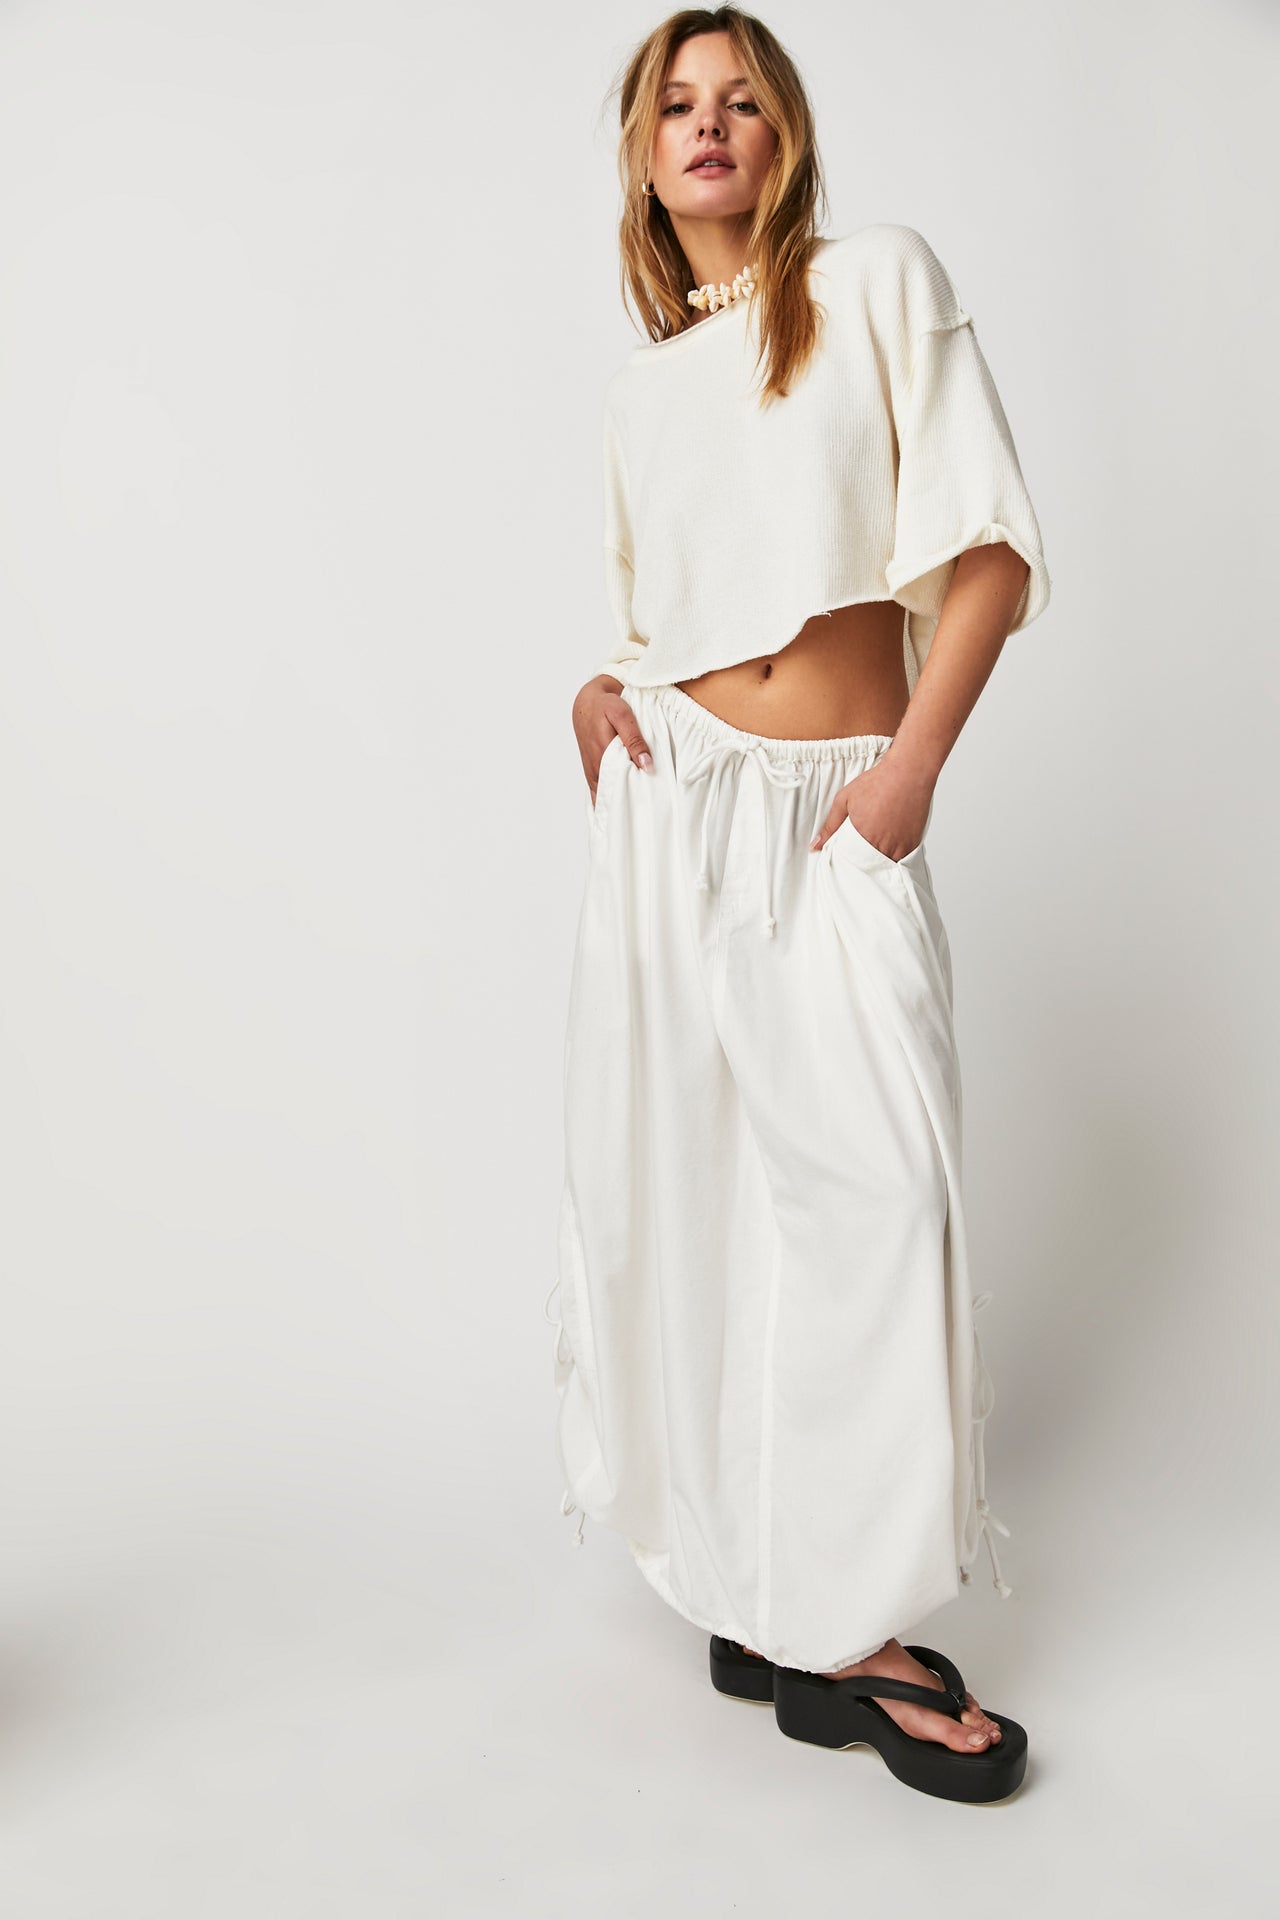 Picture Perfect Parachute Optic White 2, Maxi Skirt by Free People | LIT Boutique